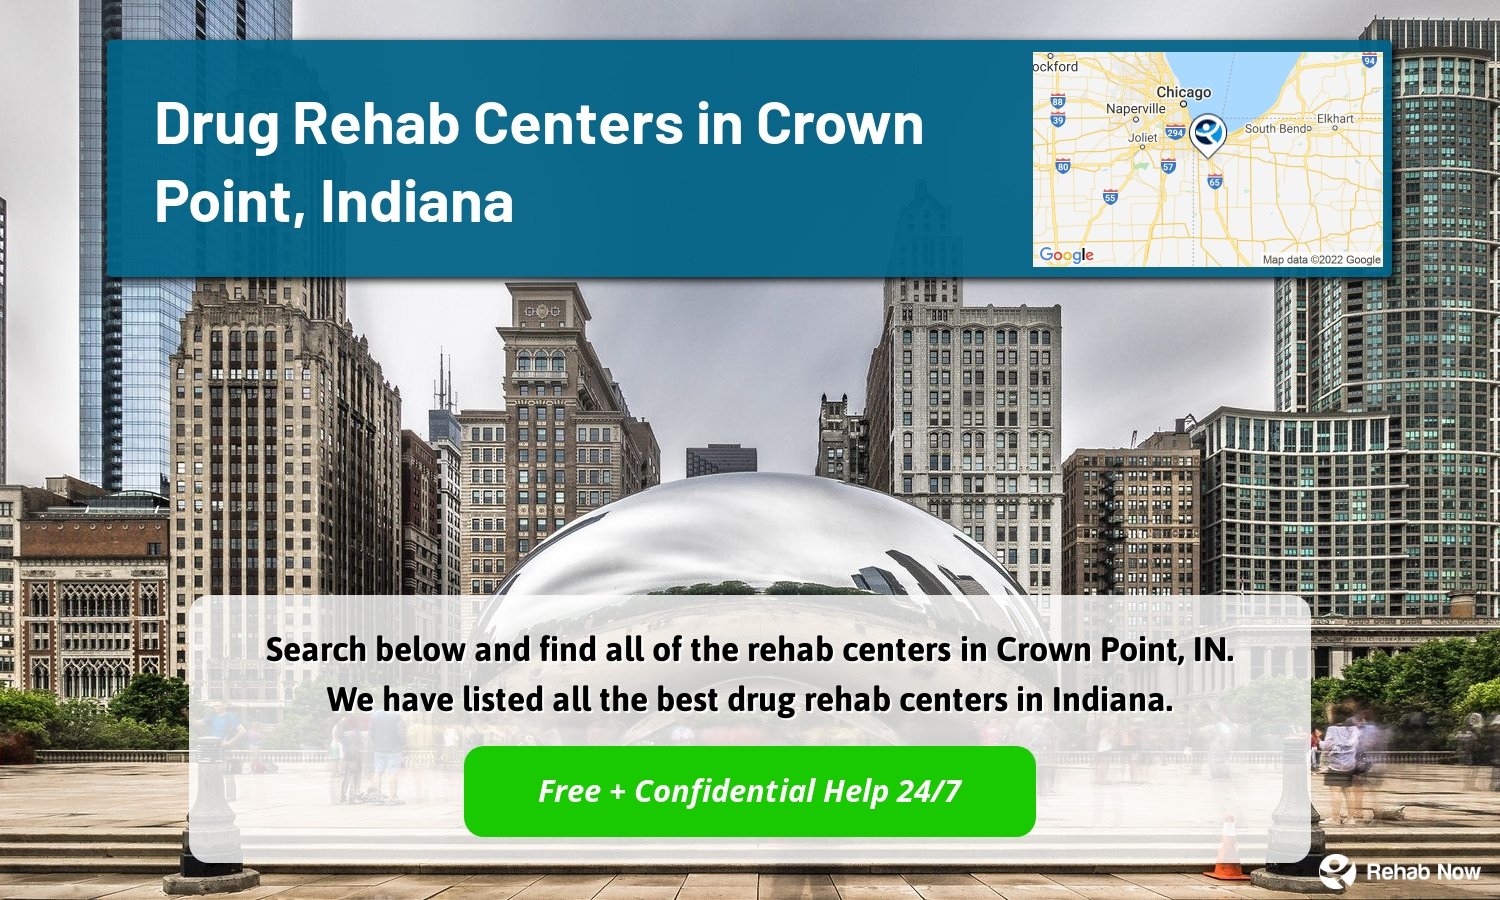 Search below and find all of the rehab centers in Crown Point, IN. We have listed all the best drug rehab centers in Indiana.